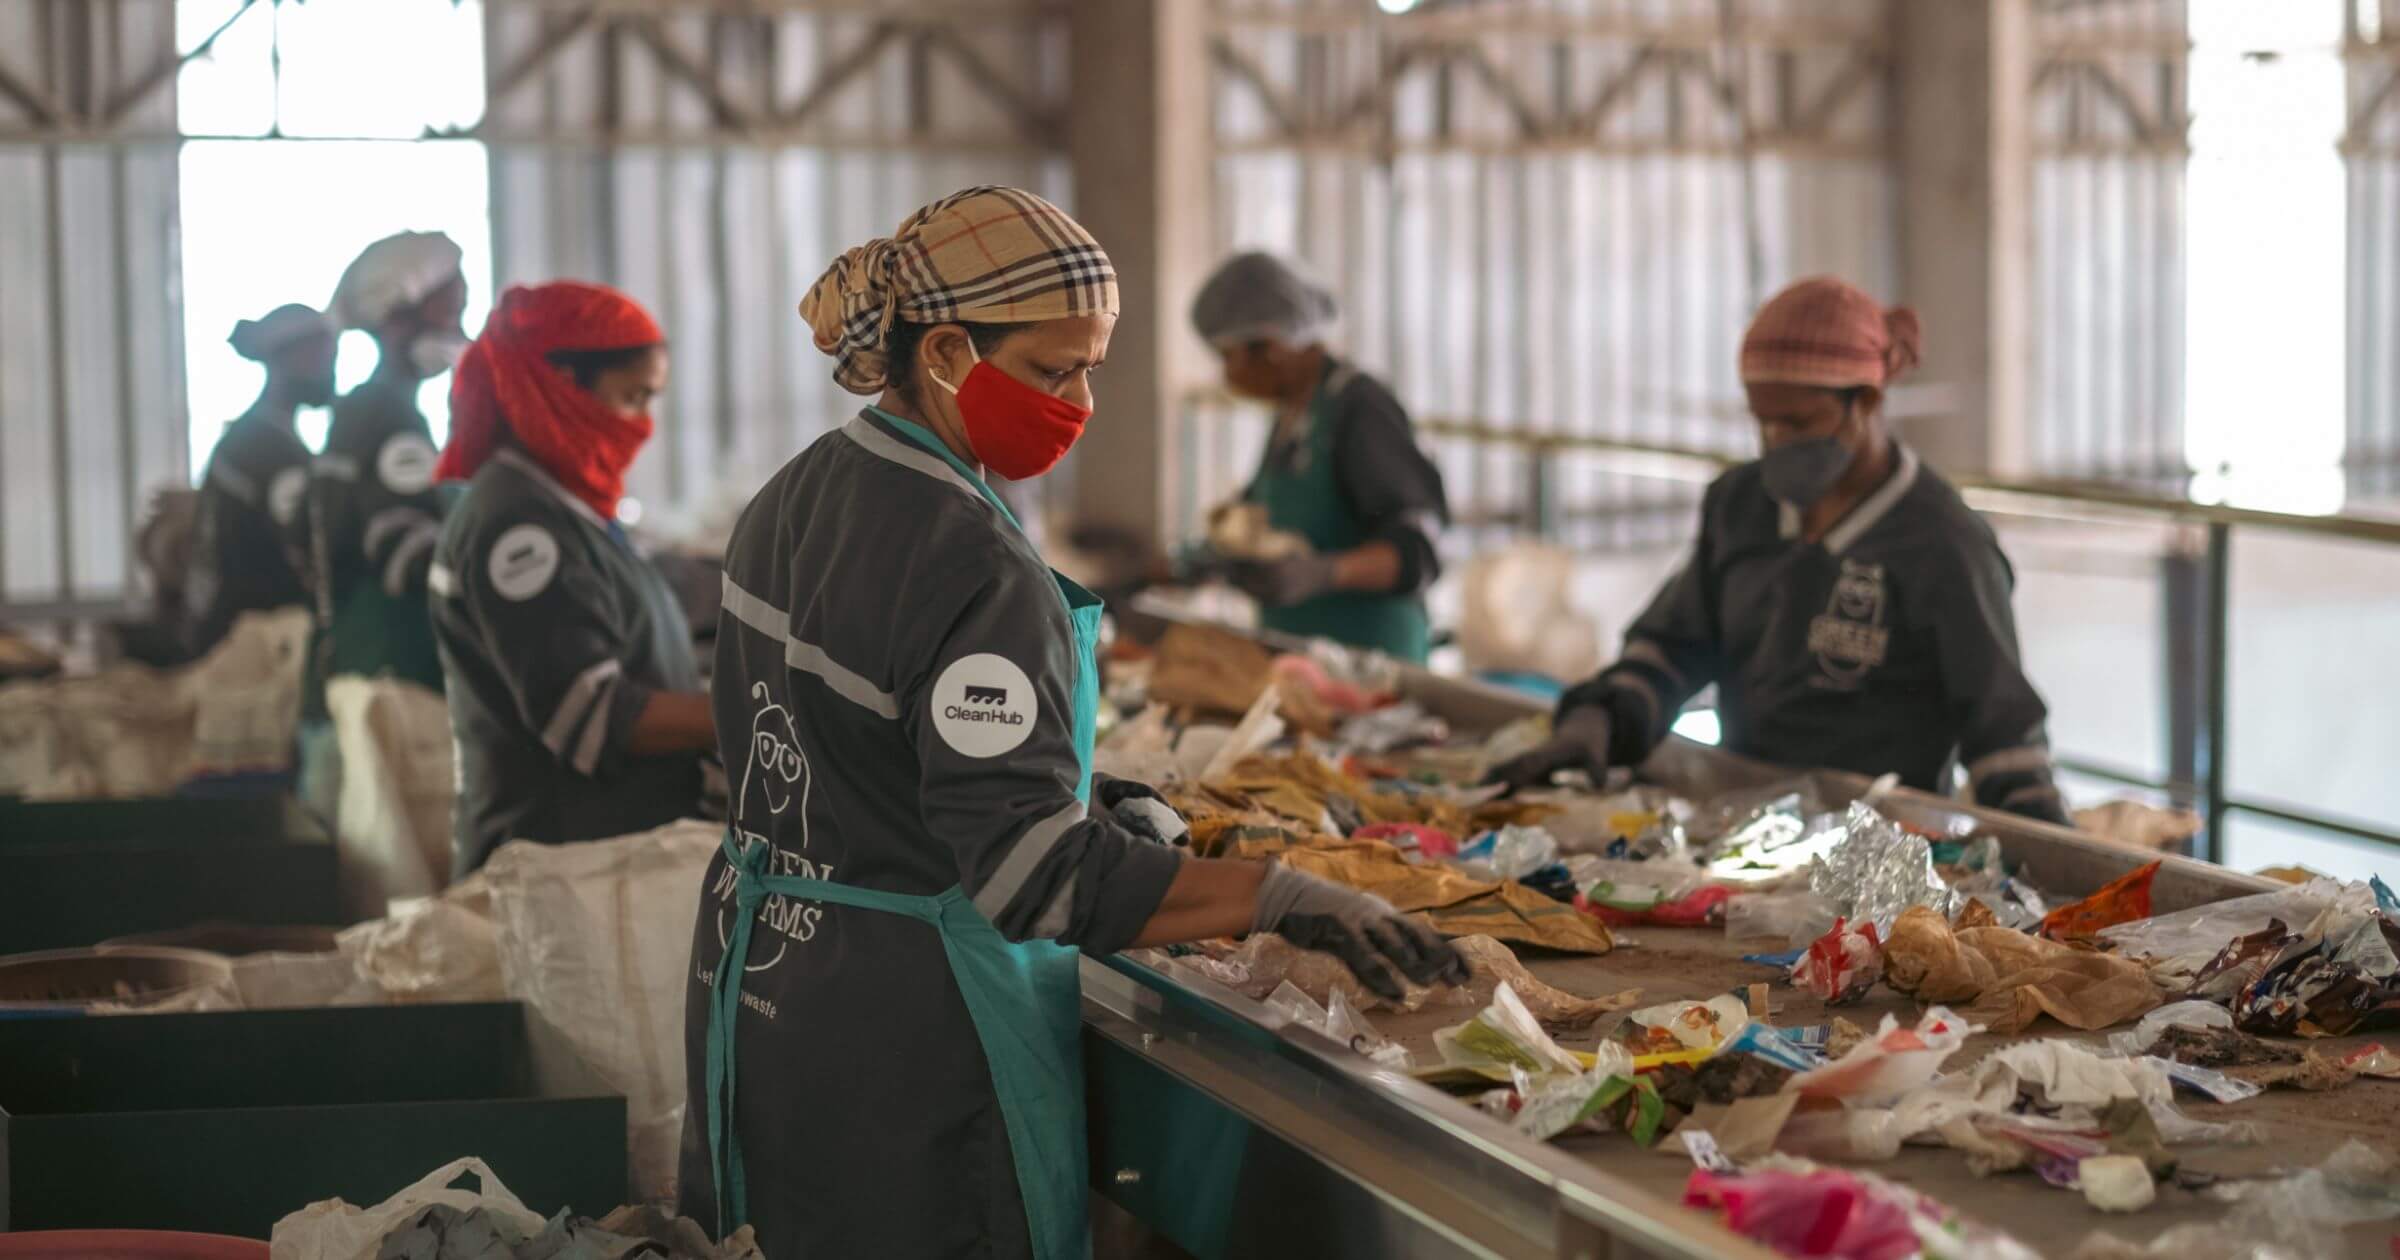 People working on the  conveyer belt at a waste collection facility sorting plastic